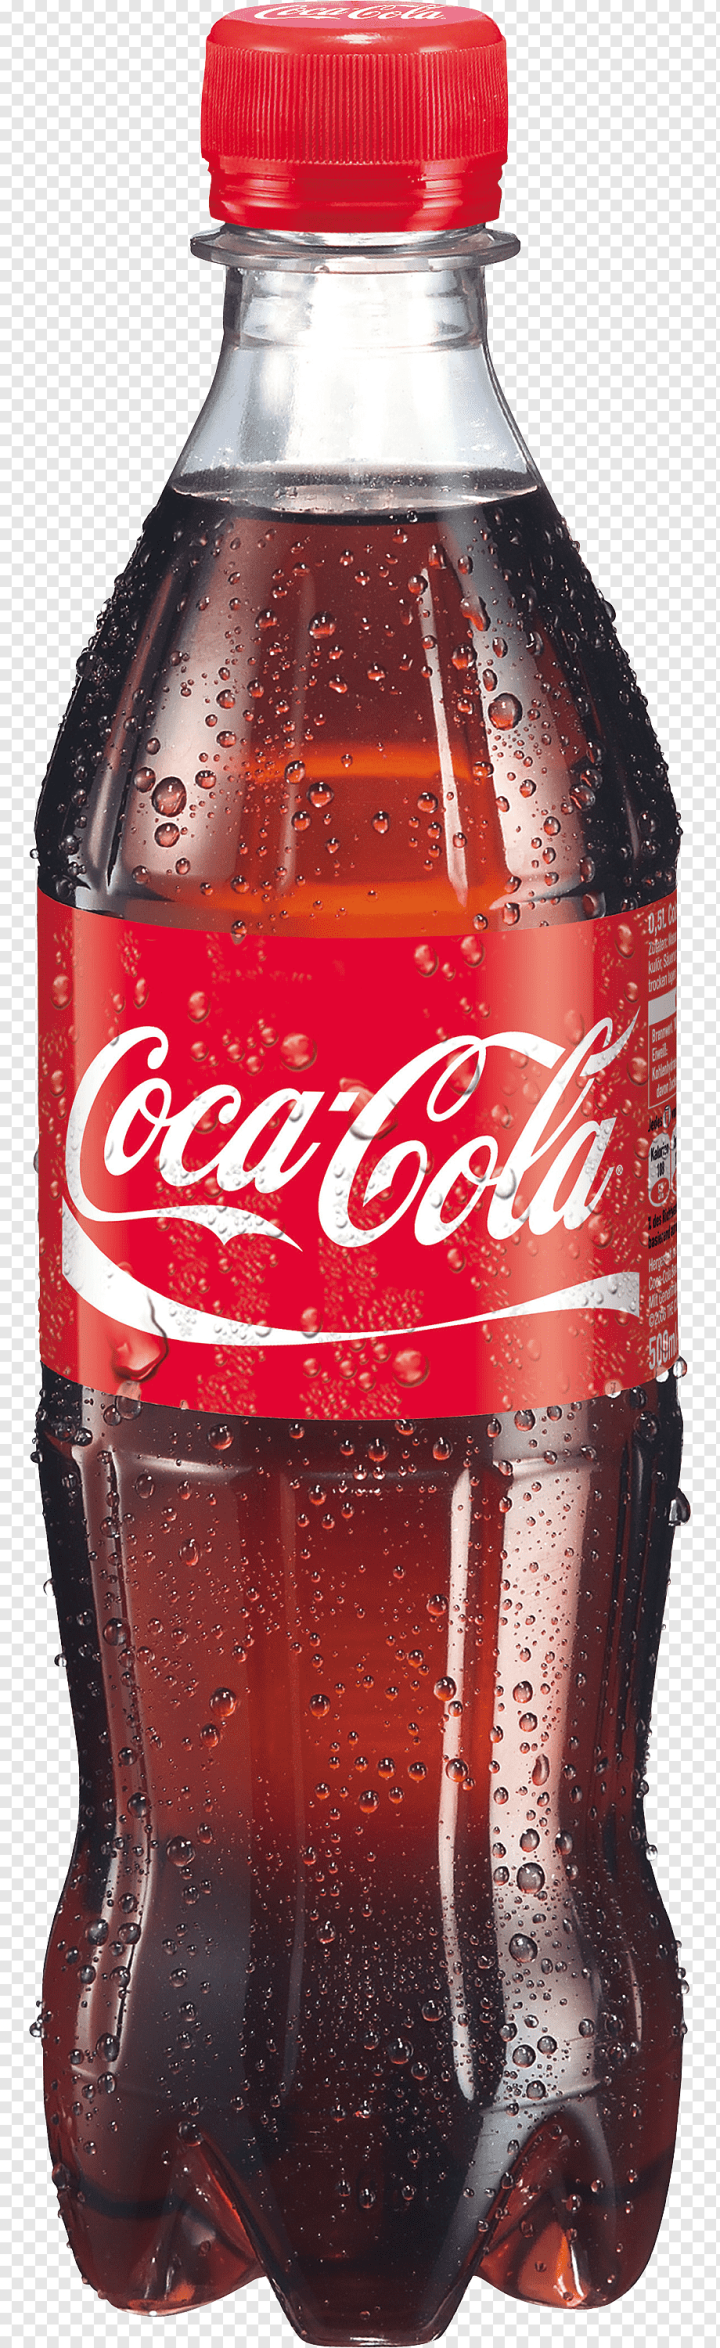 cola,aluminum Can,nonalcoholic Drink,happiness Truck,food  Drinks,drink,cocacola Zero Sugar,cocacola Zero,cocacola Vanilla,cocacola,coca Cola,coca,carbonated Soft Drinks,bottle,soft Drink,Coca-Cola,Fizzy Drinks,Diet Coke,Carbonated drink,png,transparent,free download,png